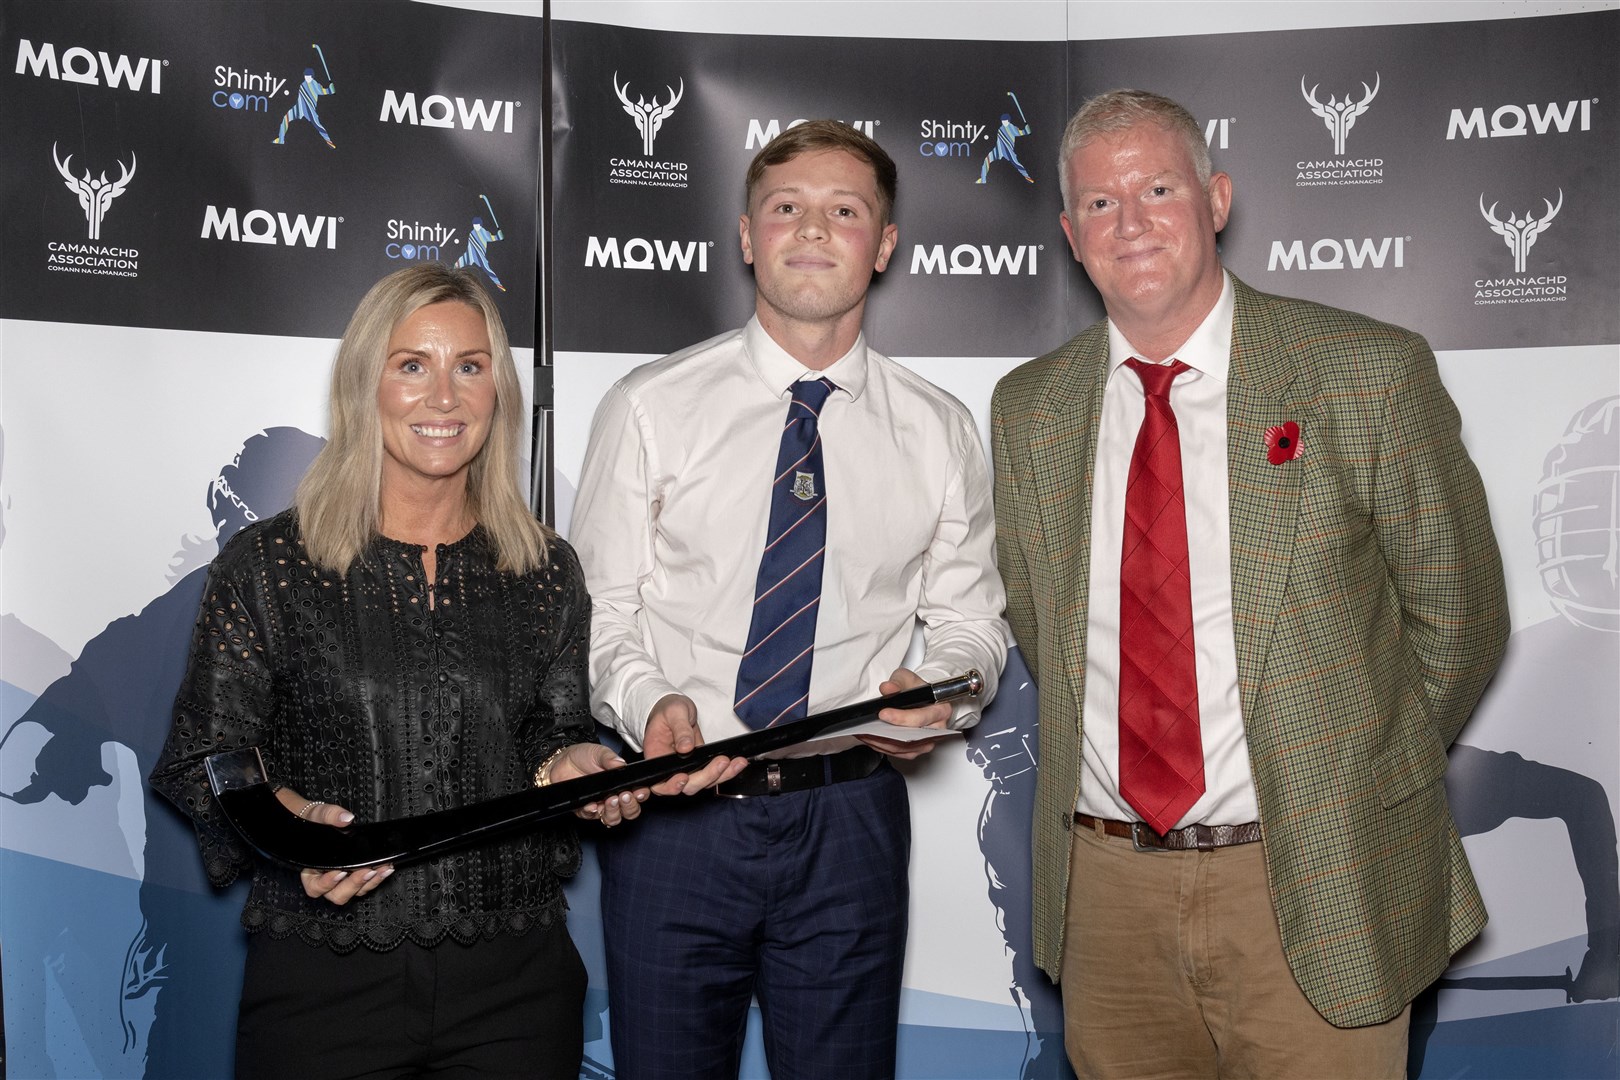 Mowi Player of the Year (Premiership & National) Roddy Young of Kingussie, is presented with the honour by Mowi's Jayne Mackay and Dougie Hunter (right) at the Mowi Shinty Awards 2022.